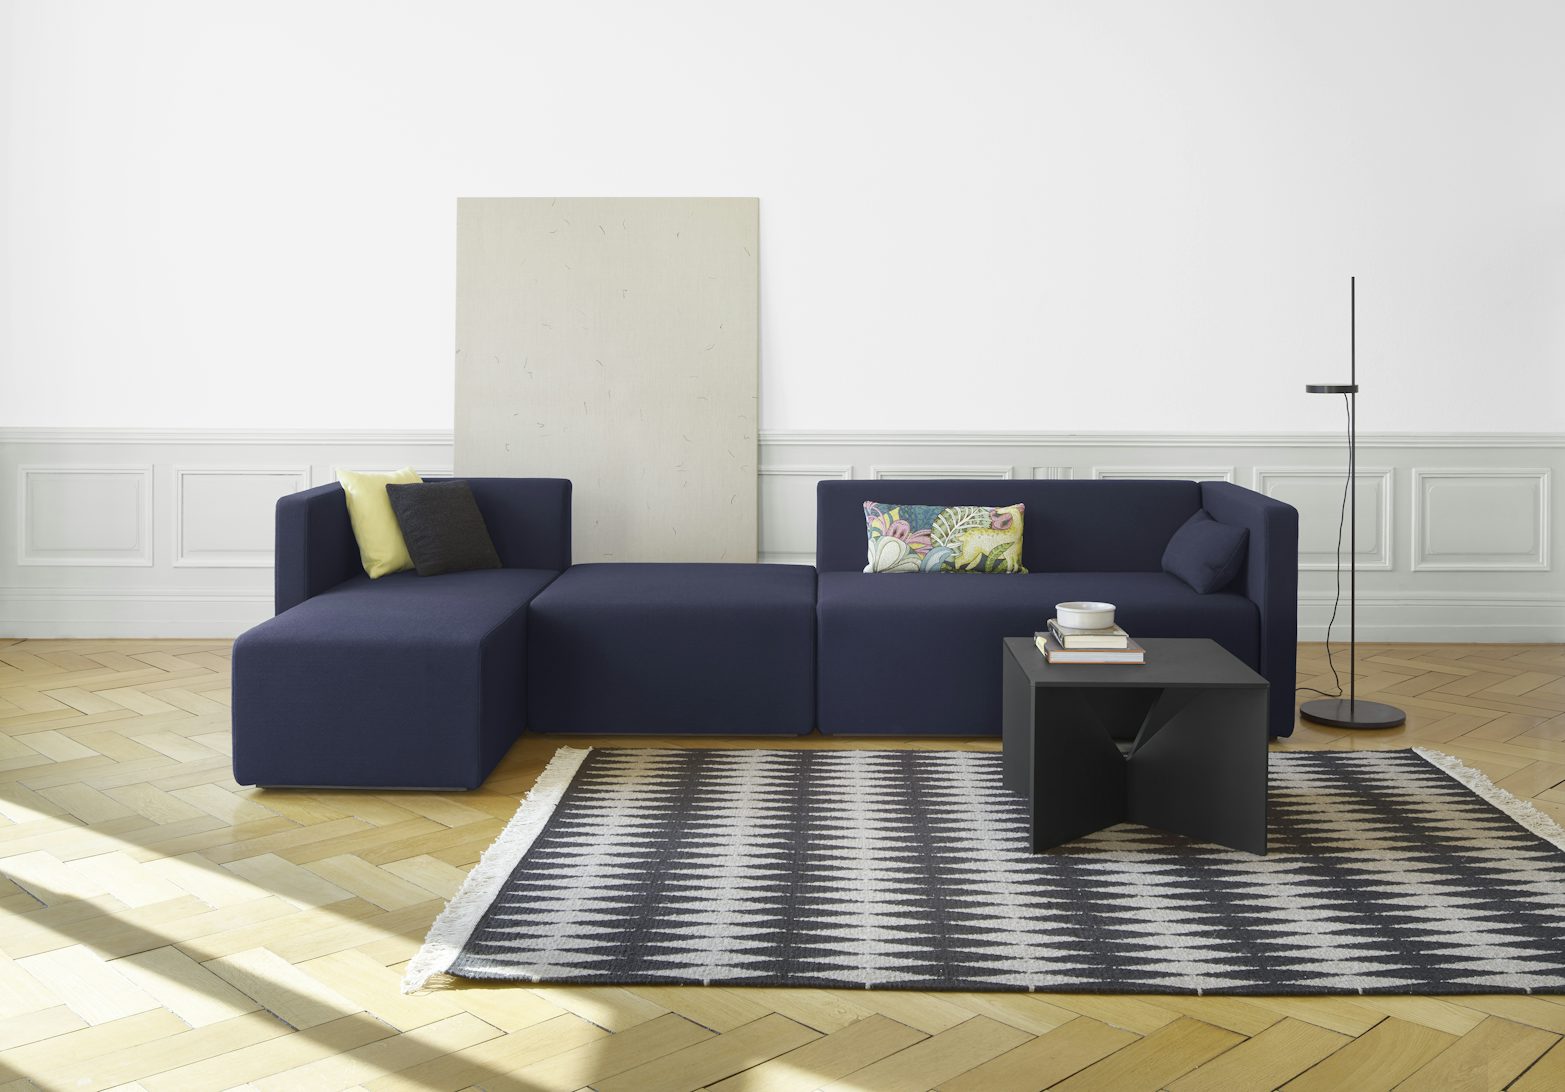 calvert table by e15 in living room with kerman sofa